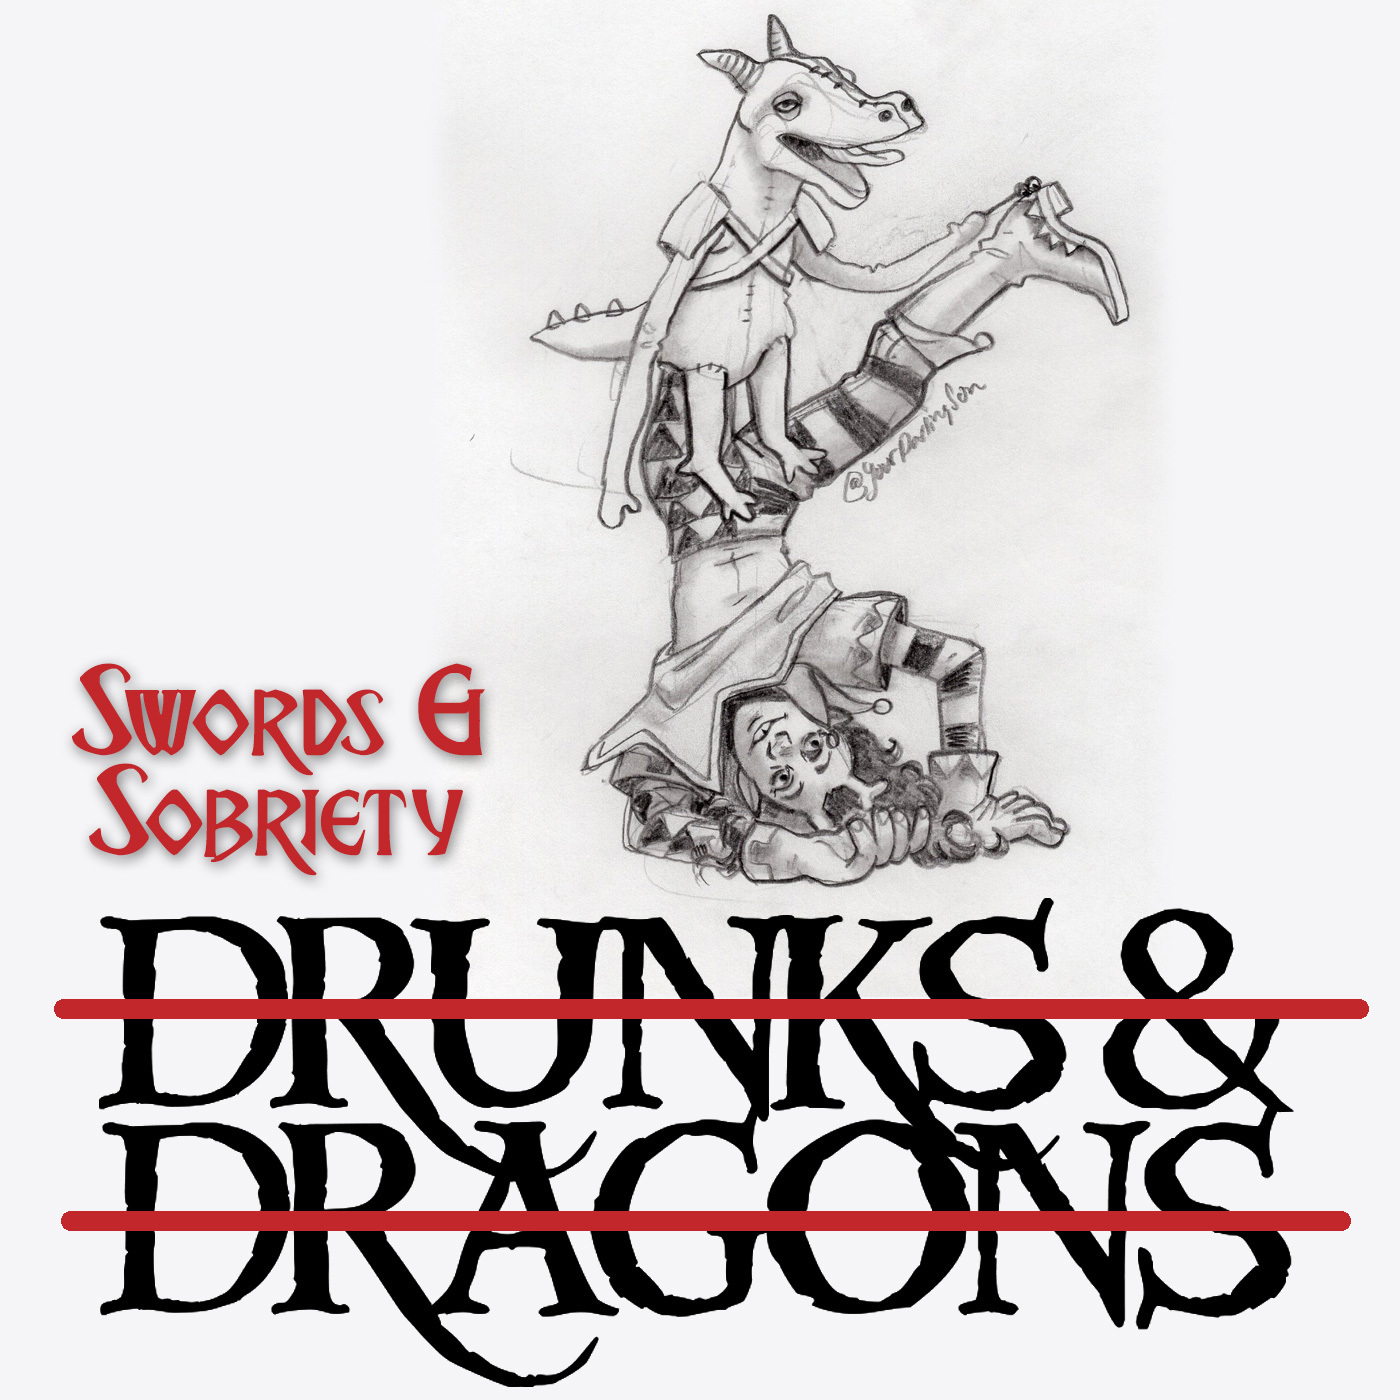 Episode 300 - Swords and Sobriety Episode 1: Tavern Troubles